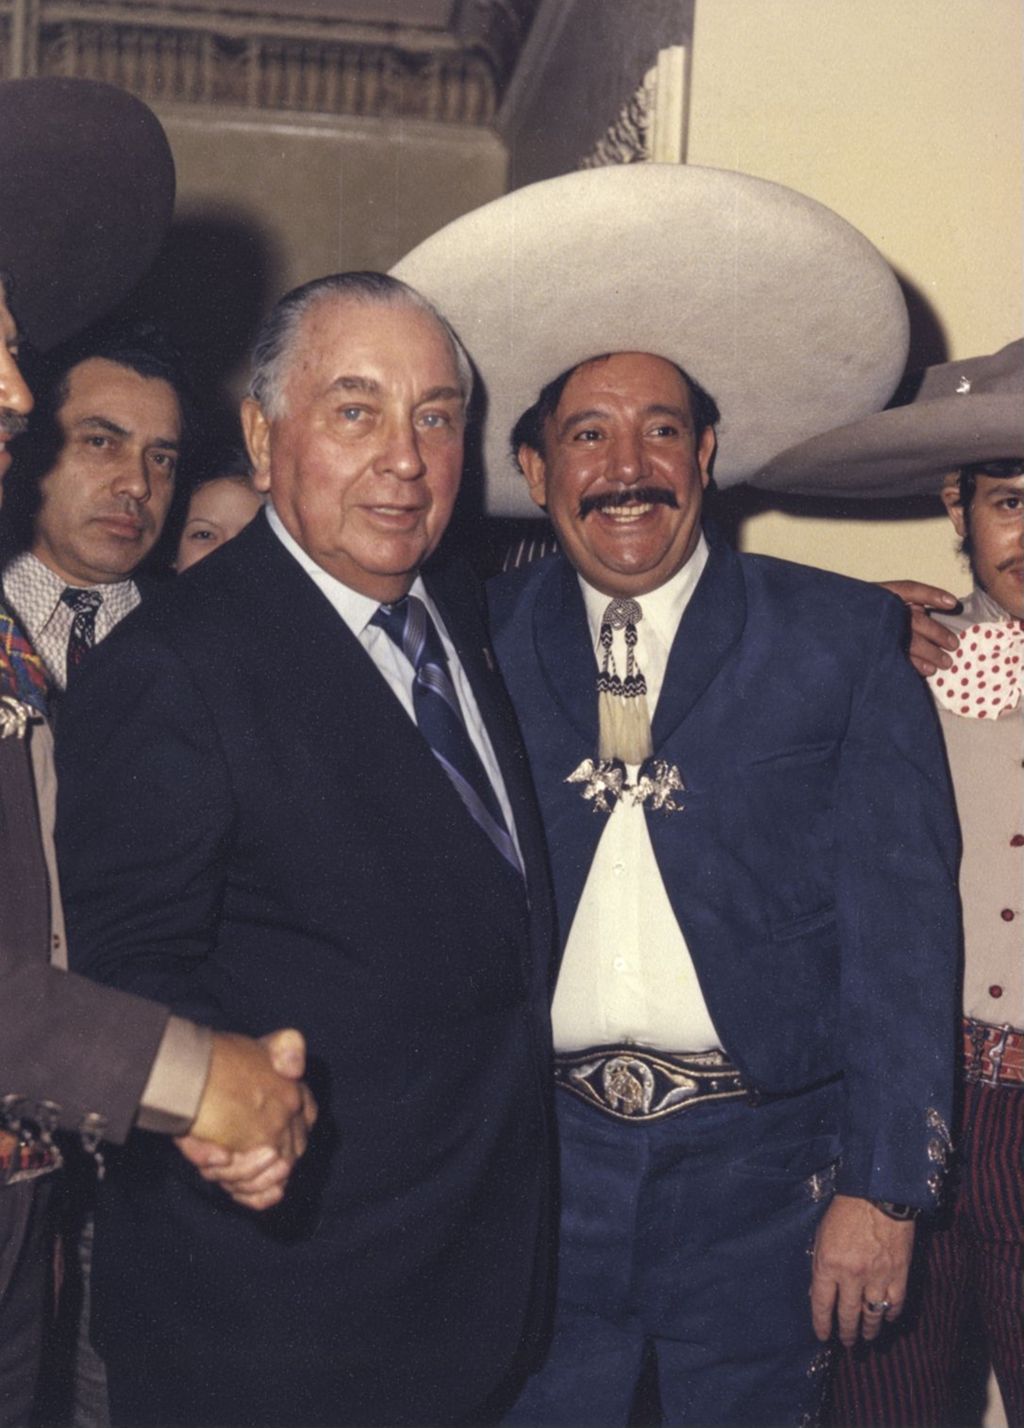 Richard J. Daley at Mexican American Democratic Organization of Cook County event